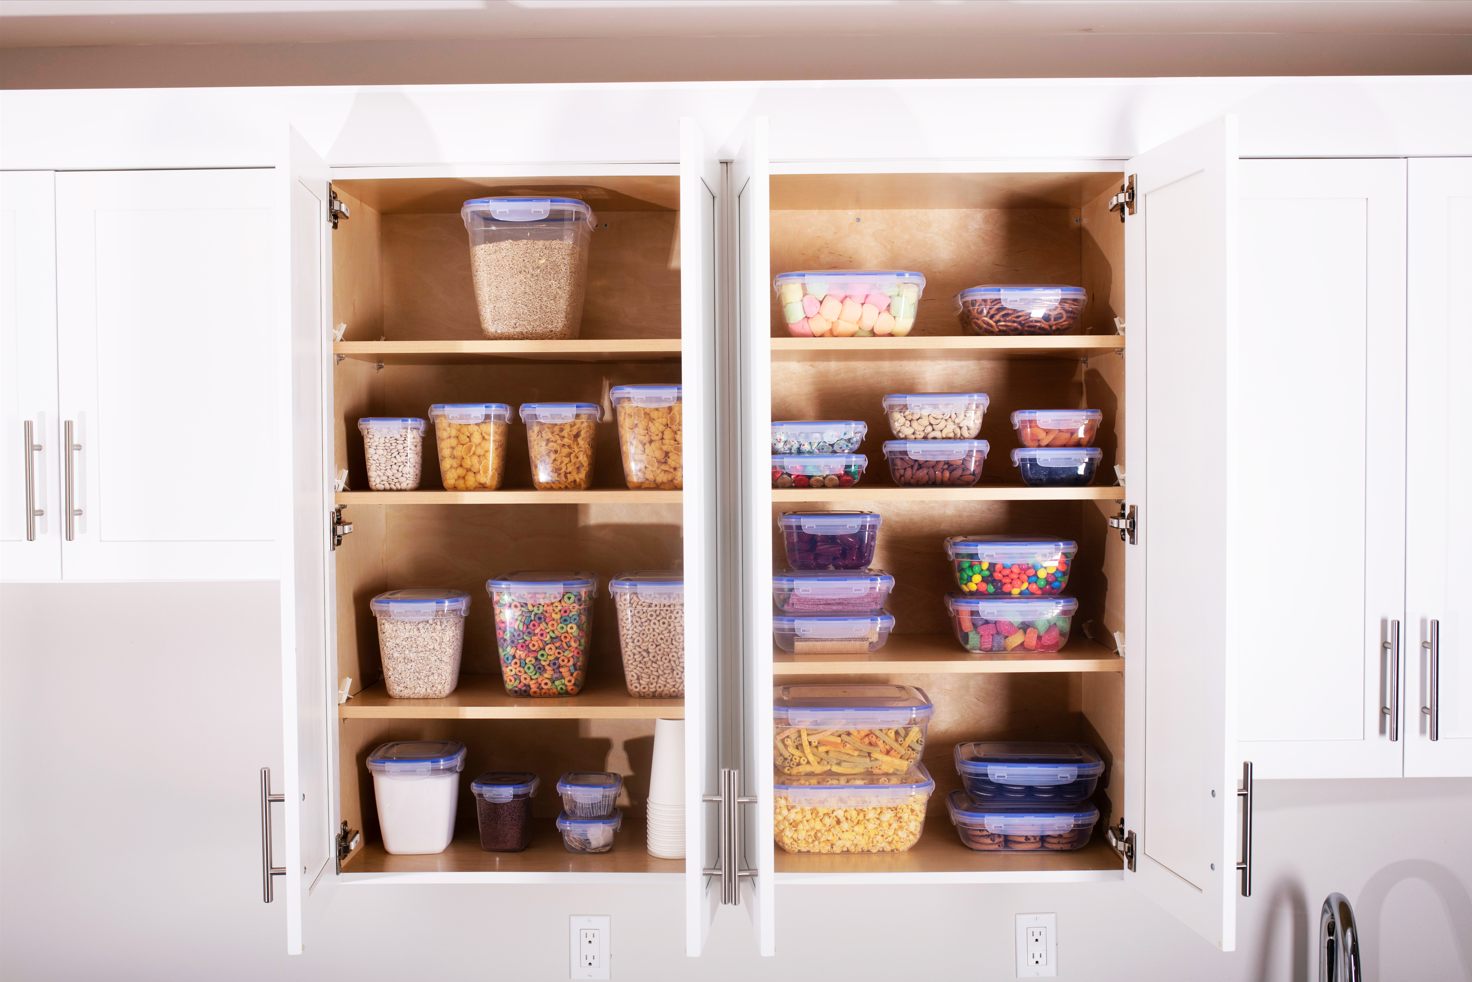 Top Benefits of storing food in an airtight container, by Superio Brand